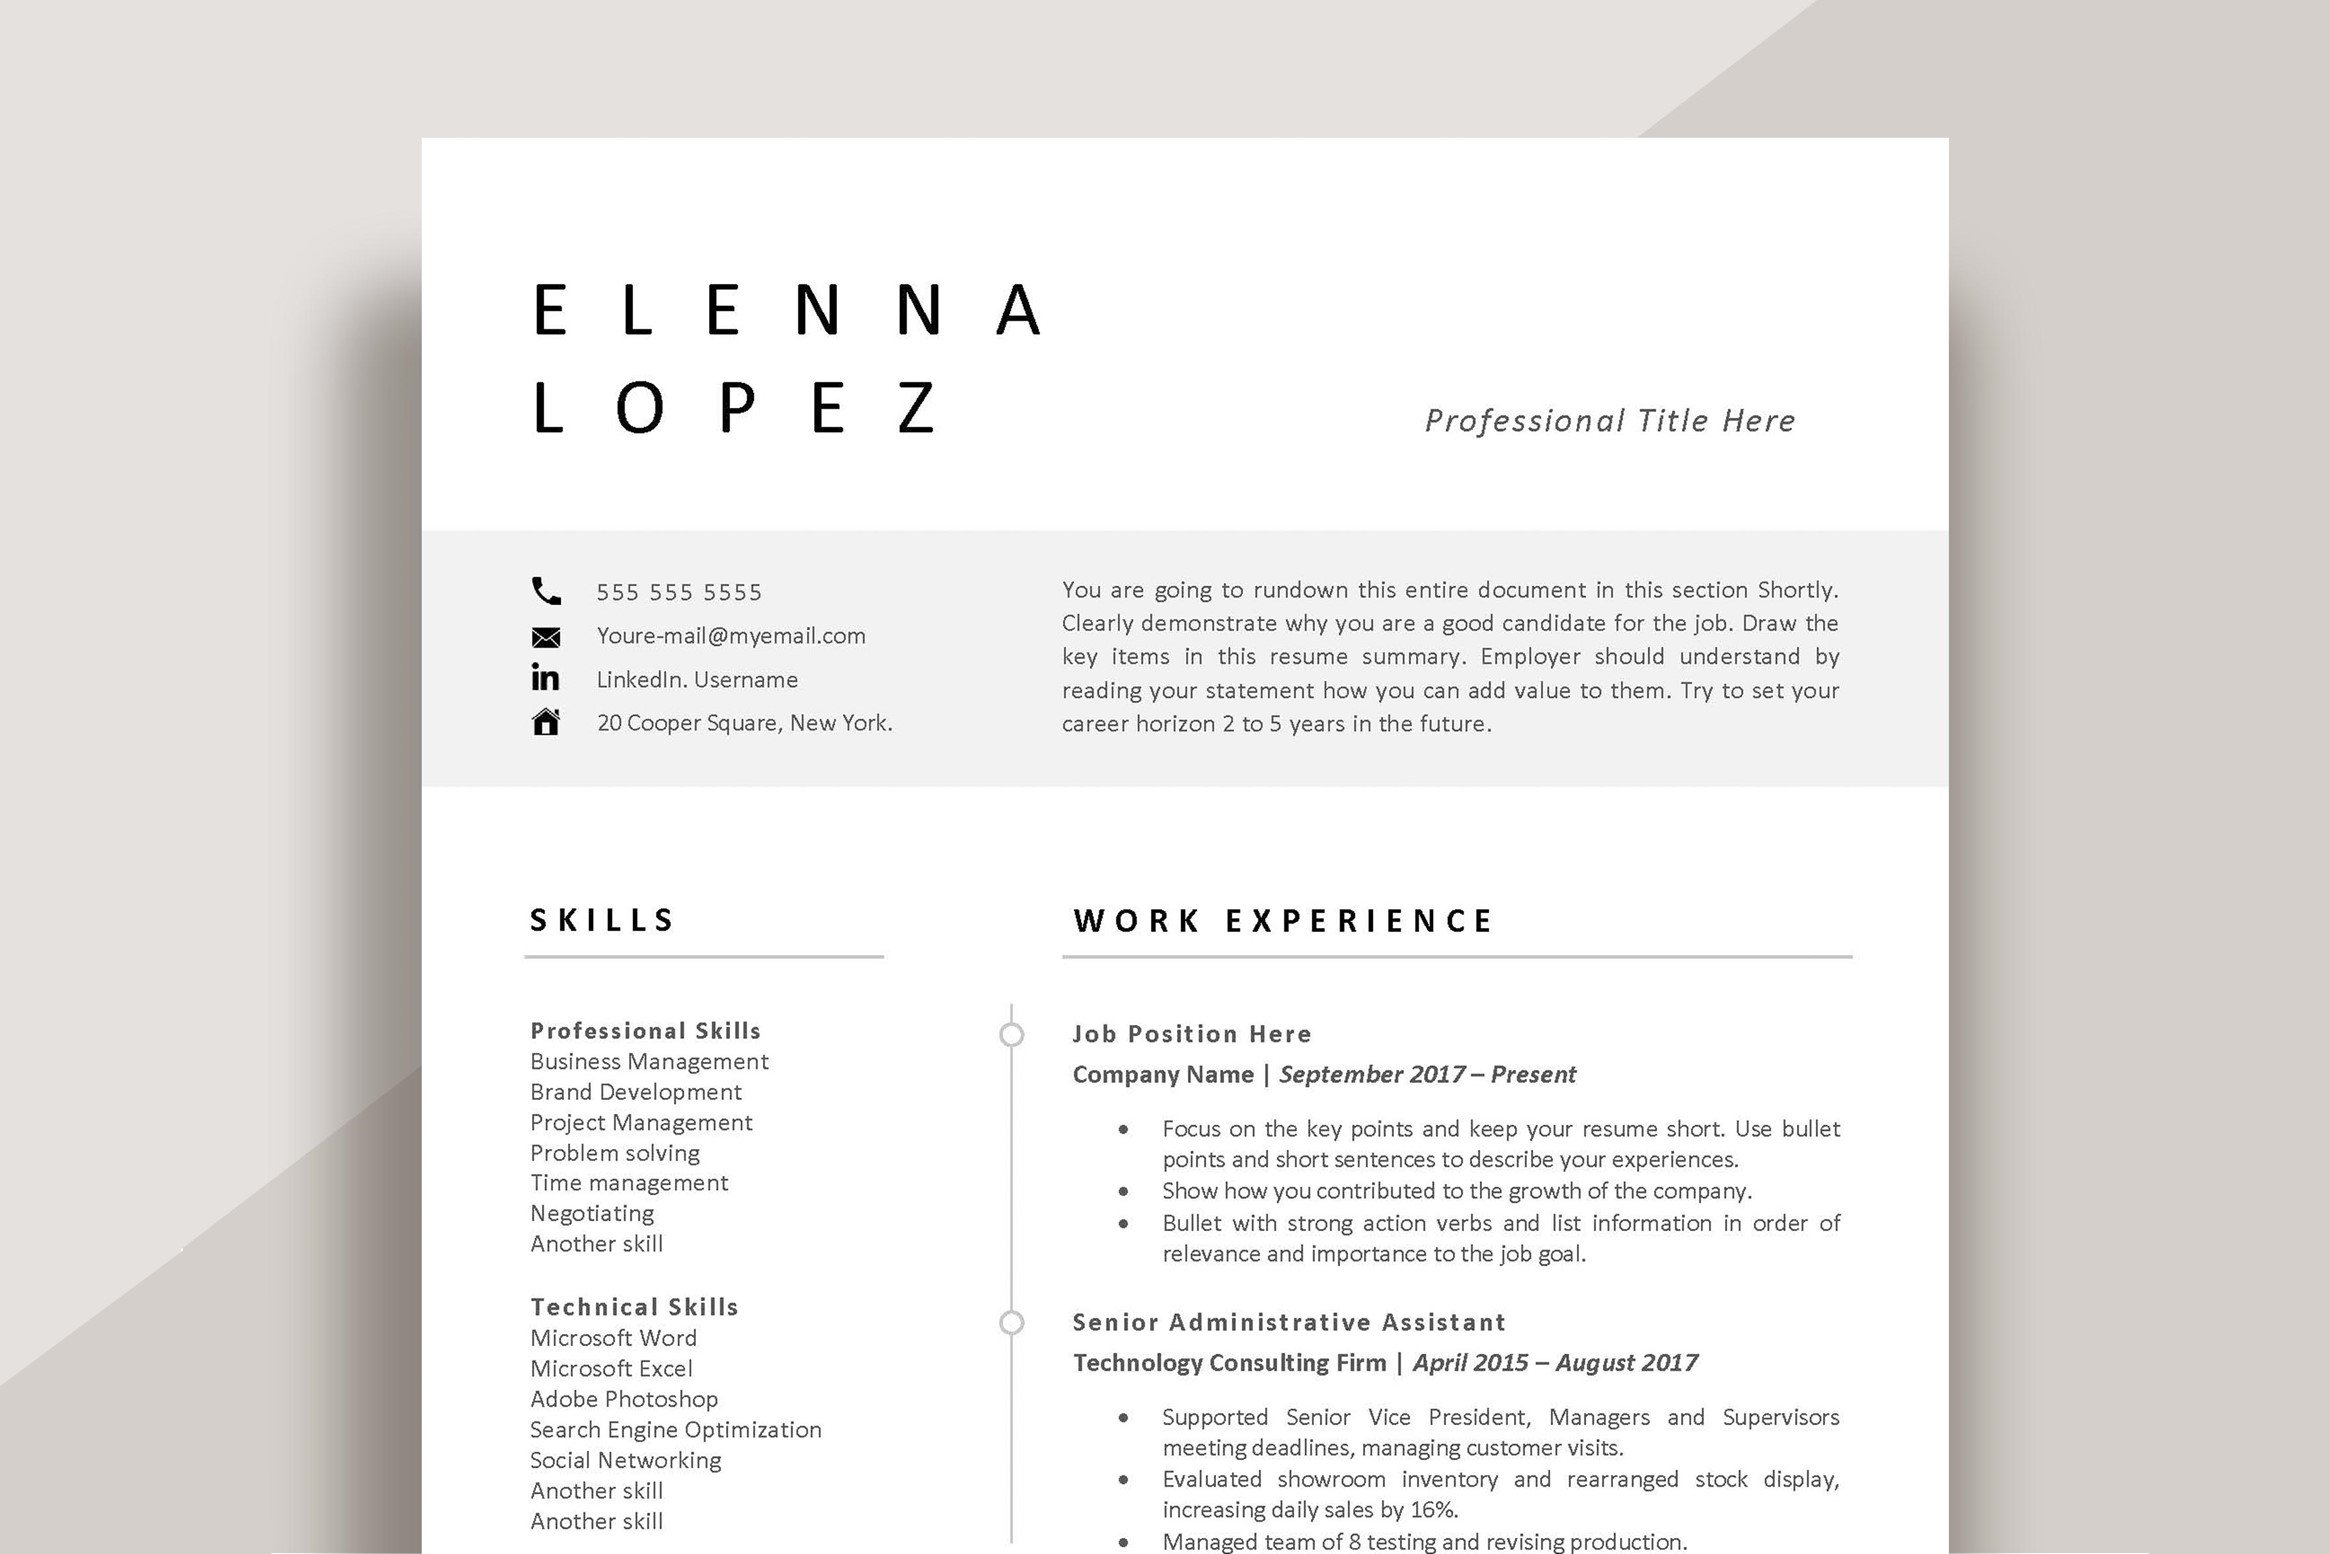 Professional Resume Template cover image.